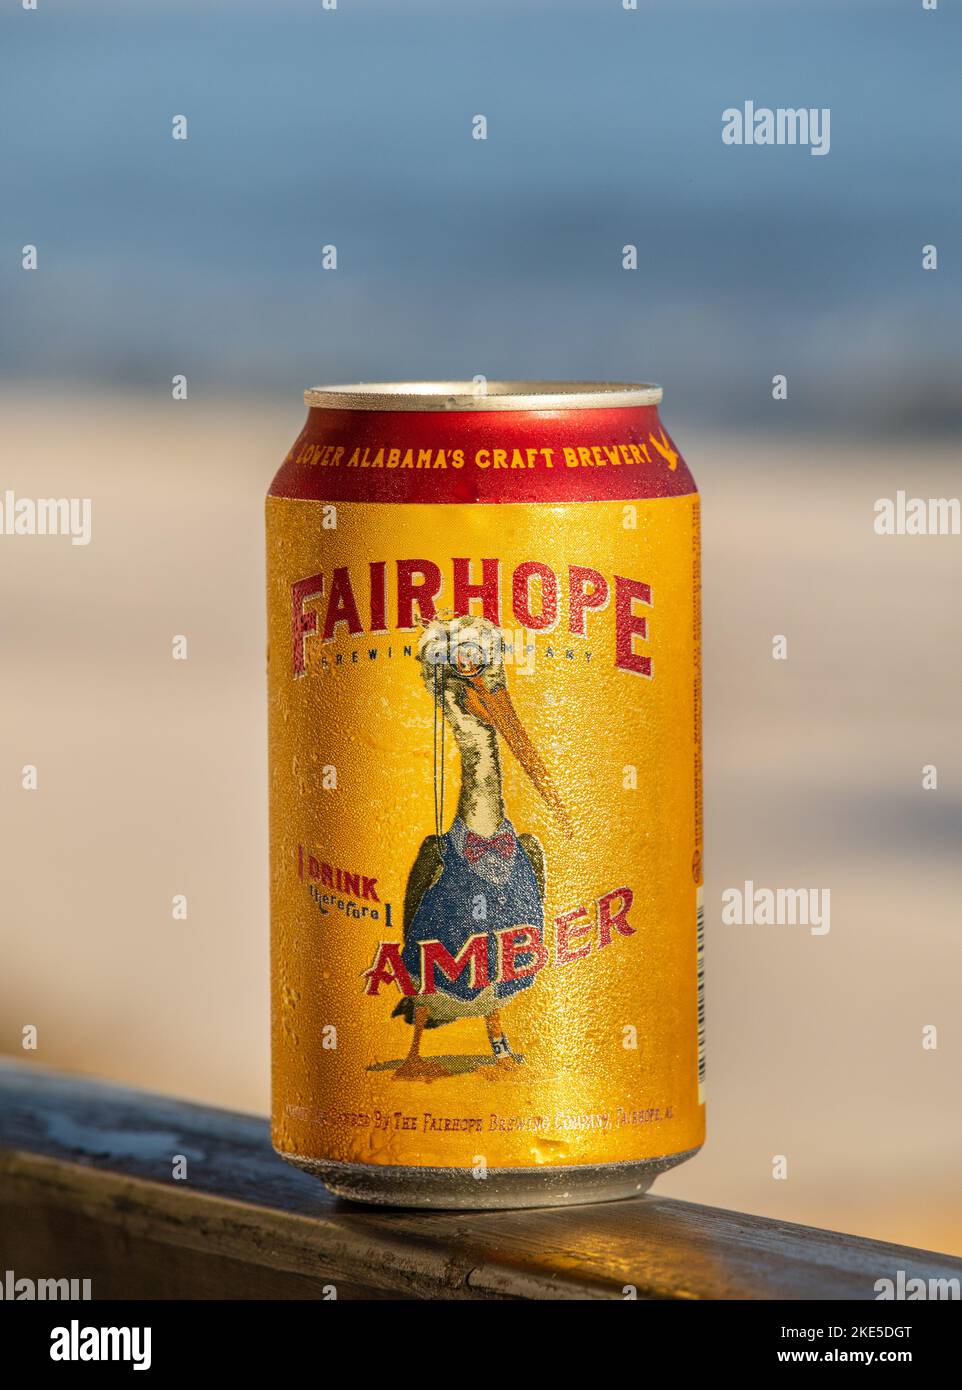 Fairhope Brewing Company Amber Craft Beer Dose von der Fairhope Alabama USA Alabamas Craft Brewery Stockfoto